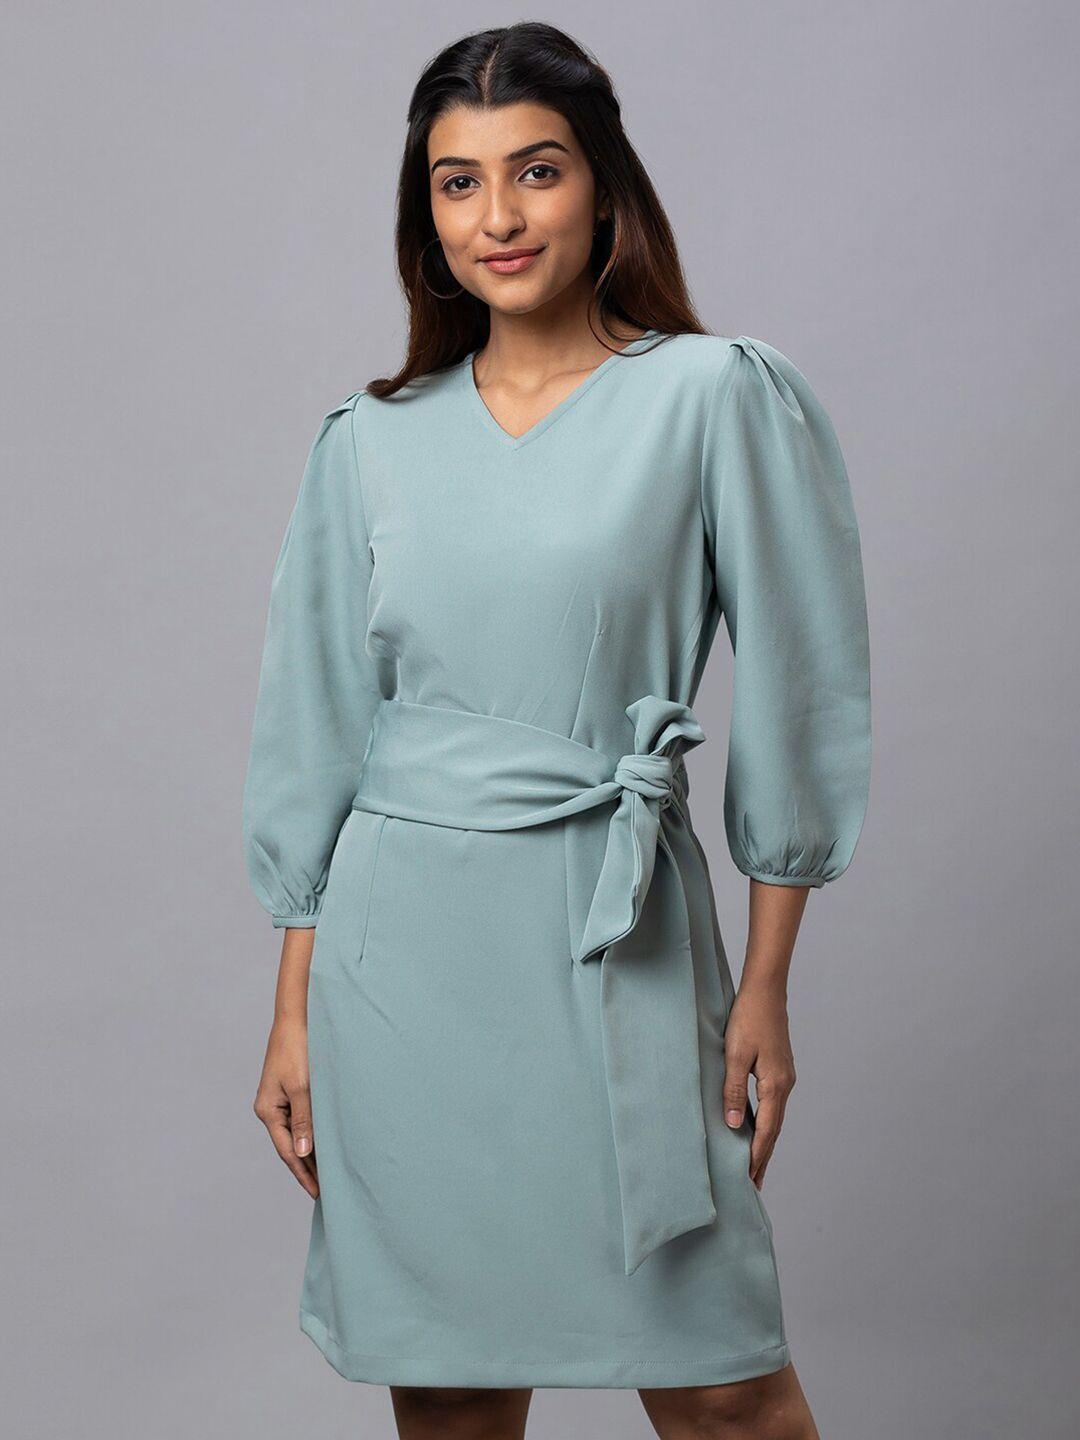 globus v-neck puff sleeves tie-up a-line dress